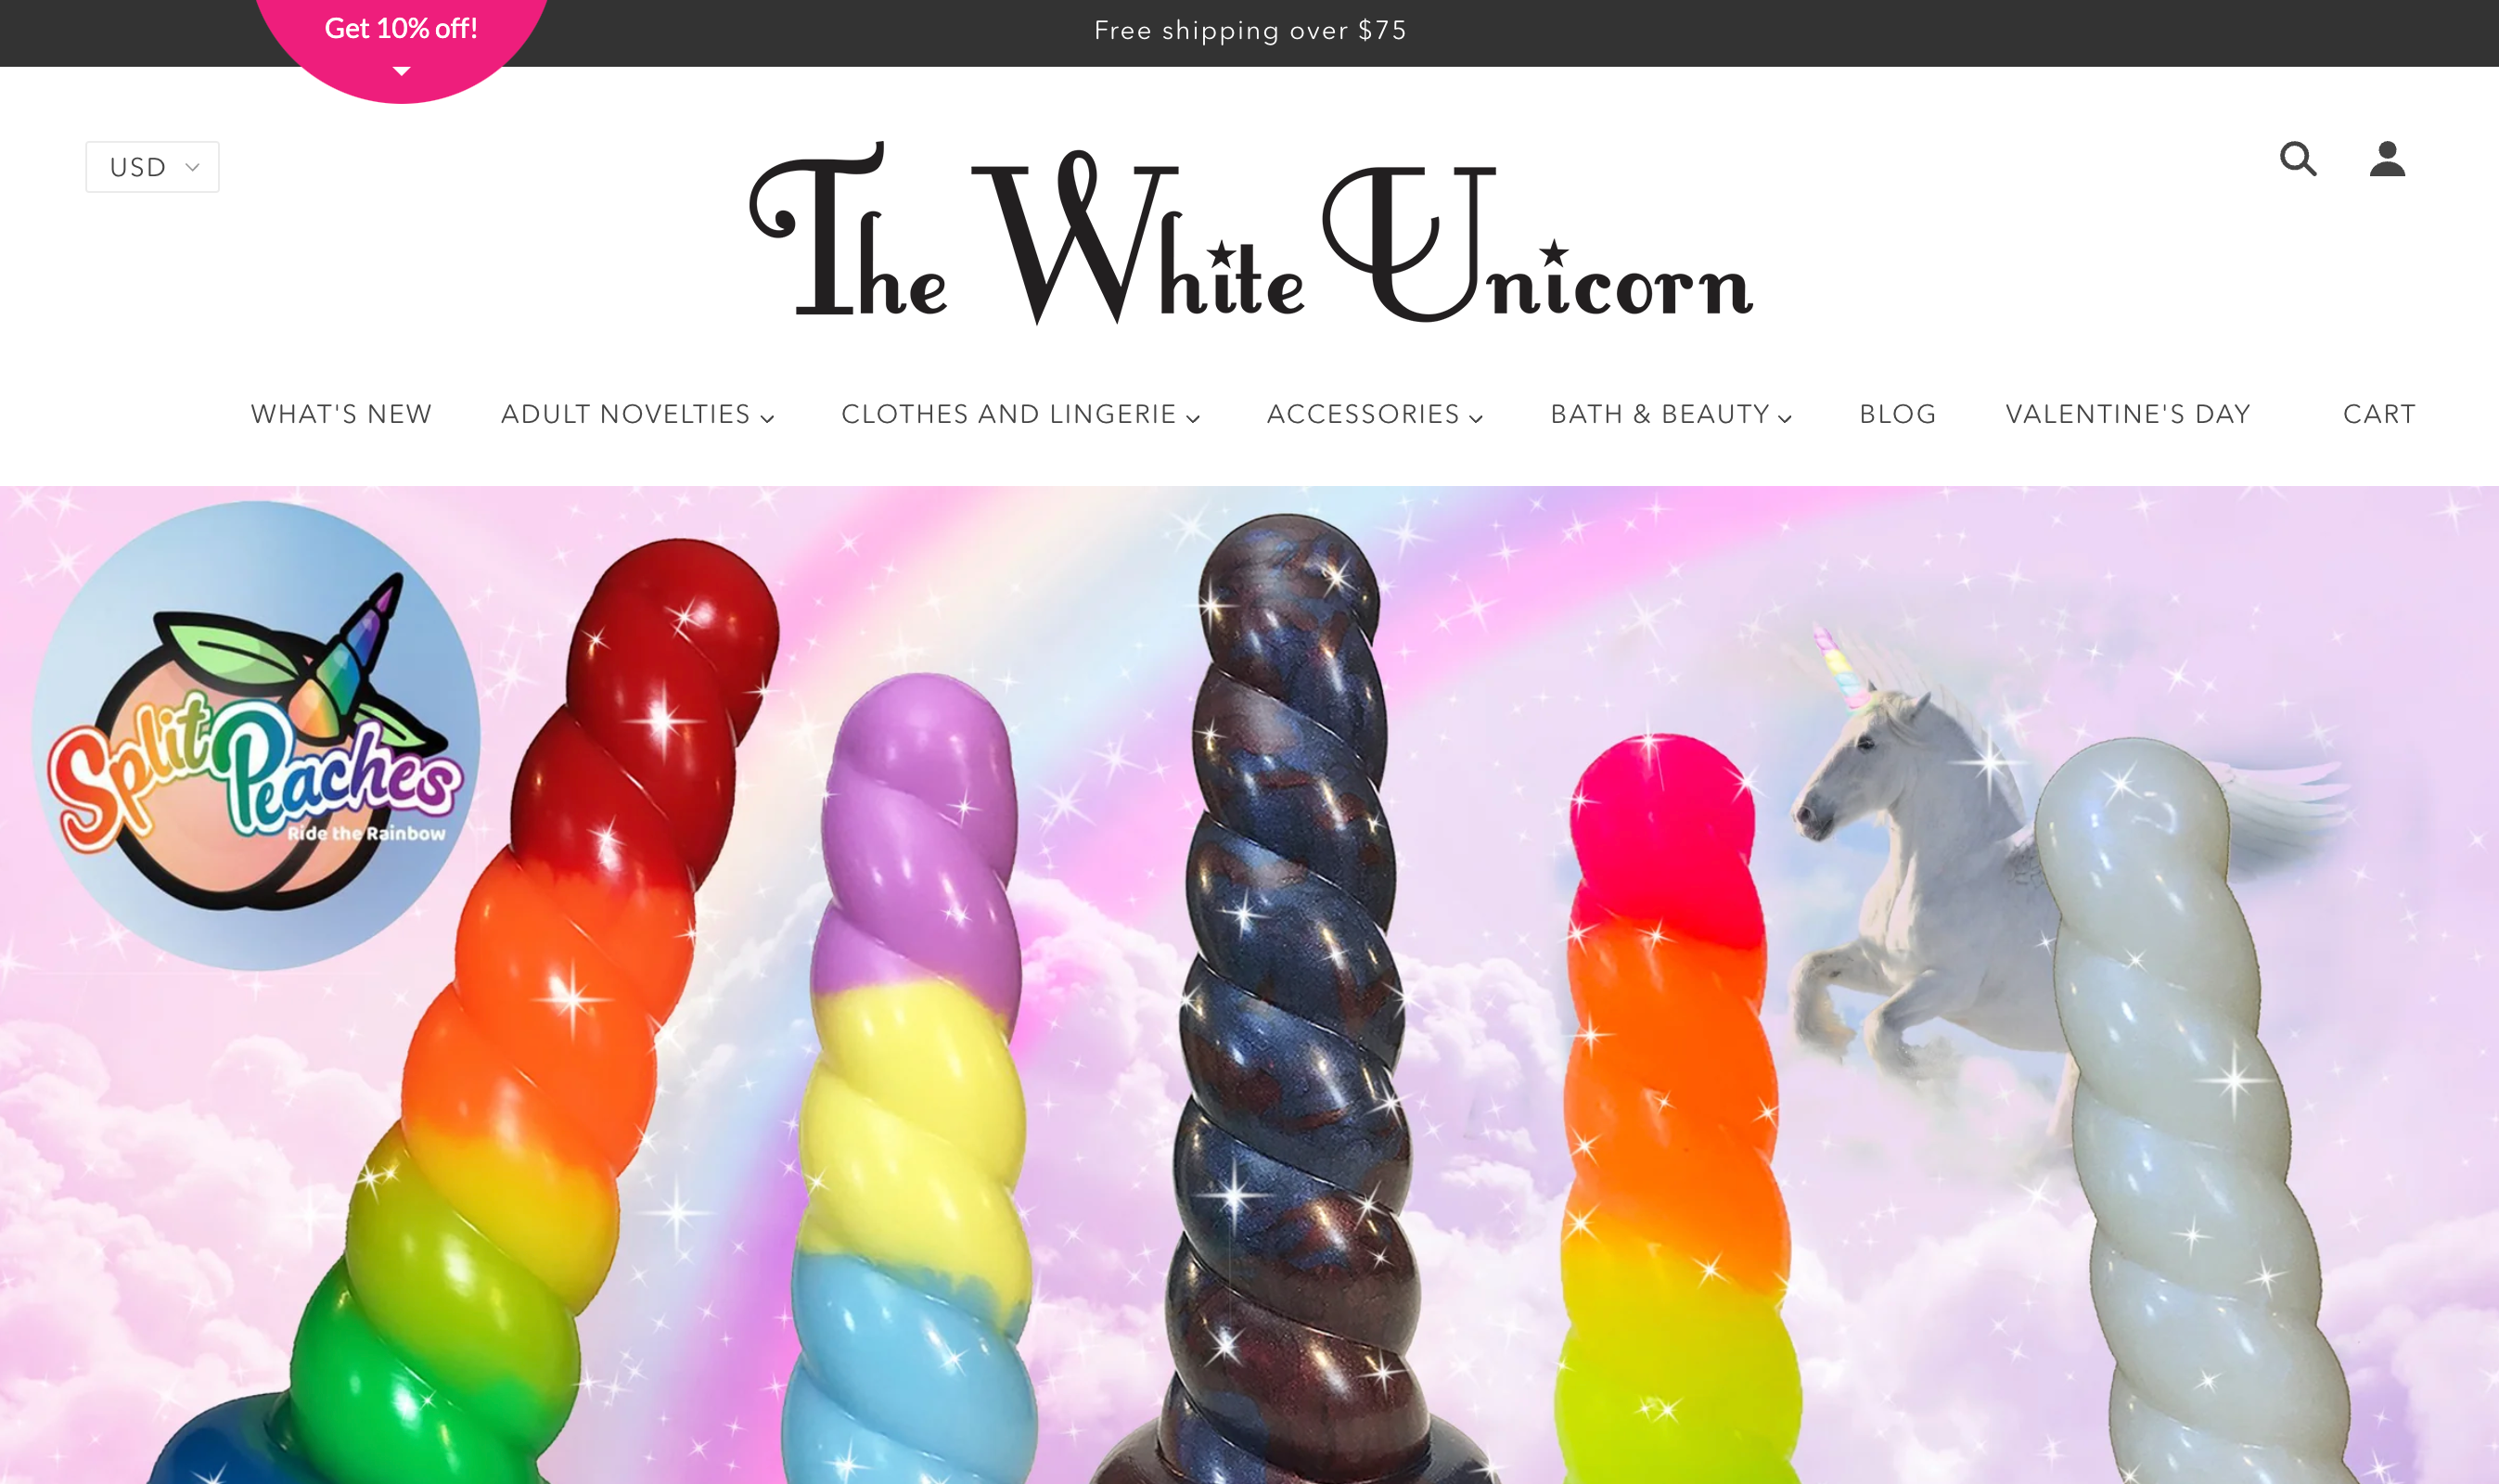 An ecommerce home page for a brand selling sex toys